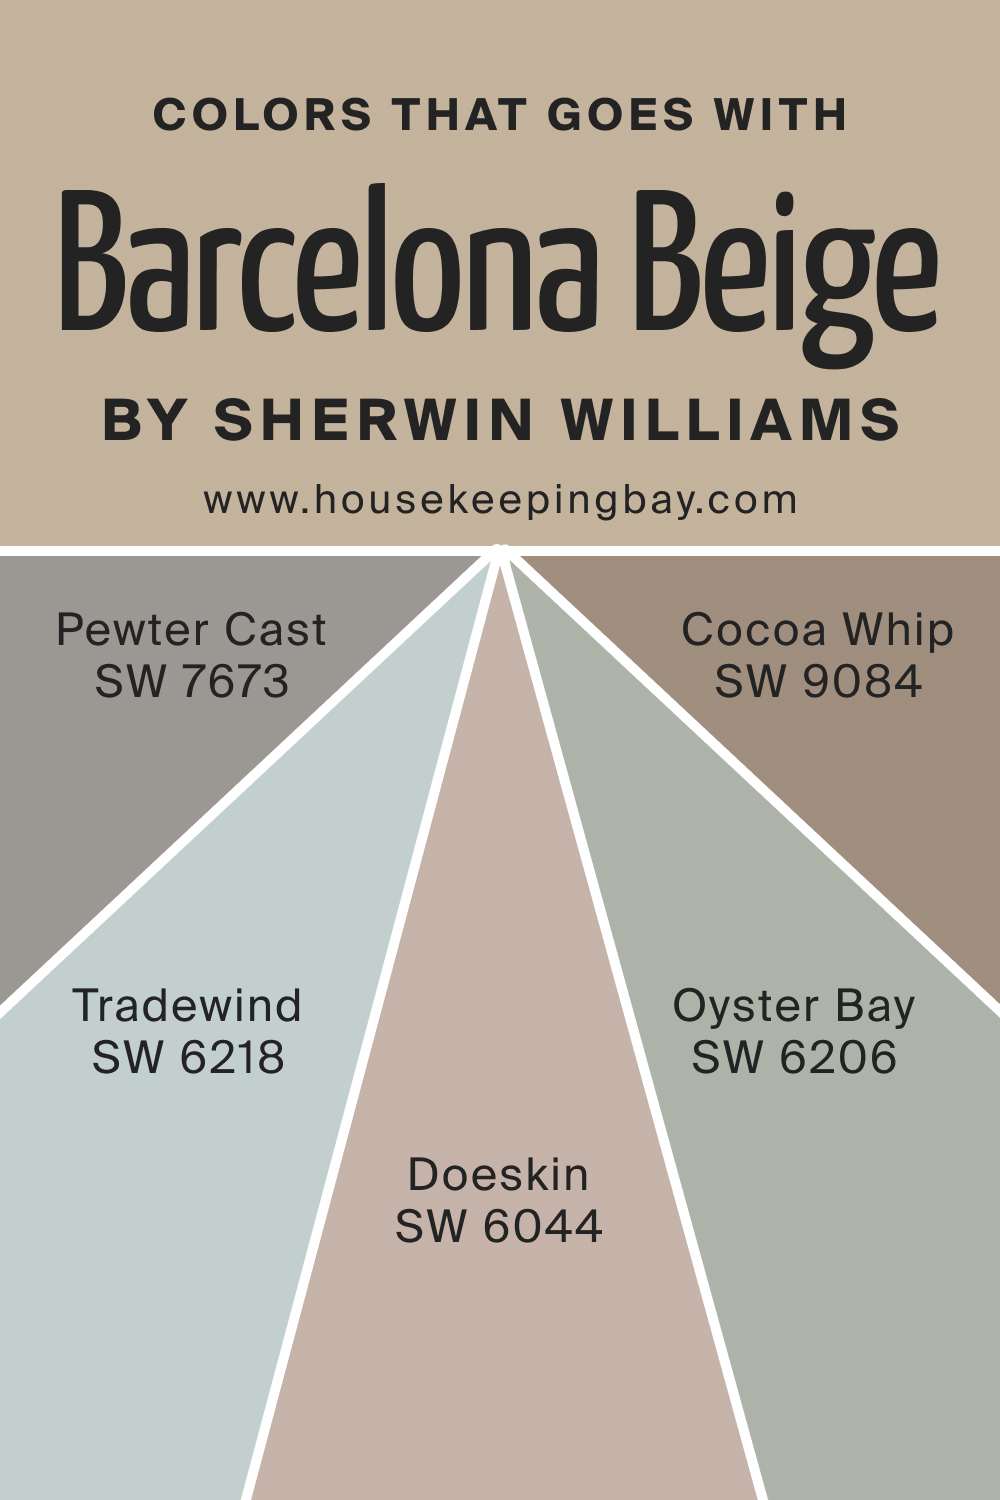 Colors that goes with Barcelona Beige by Sherwin Williams